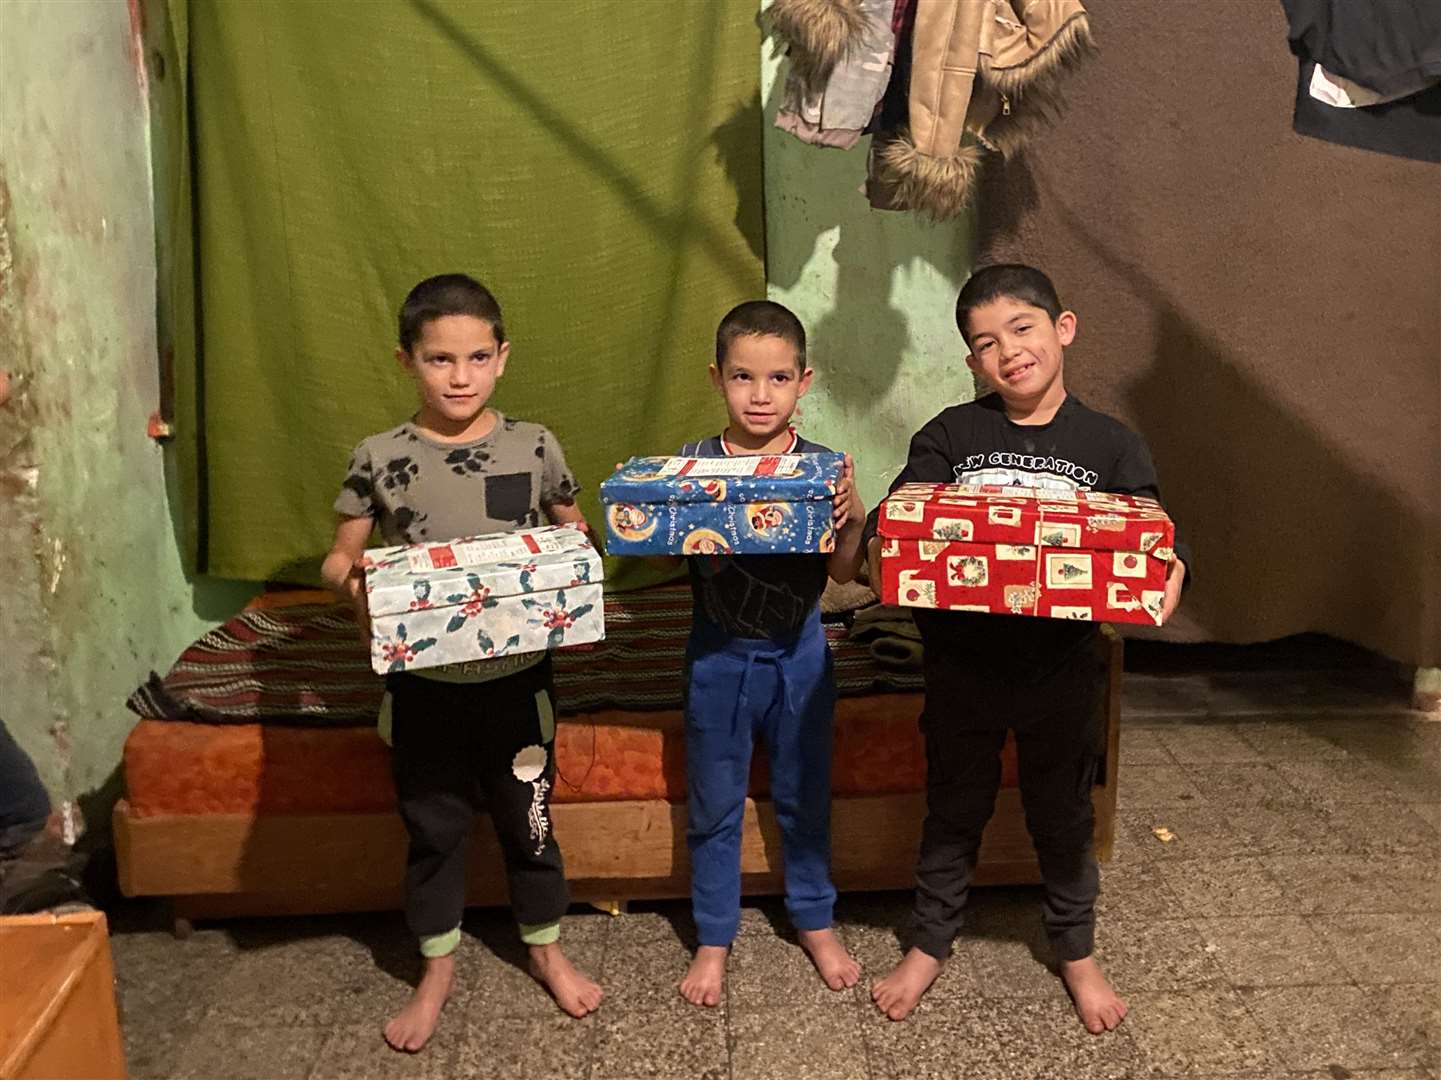 Brothers Rikardo, Jozsef and Zoltan, with boxes distributed to low-income families in Ozd, northern Hungary